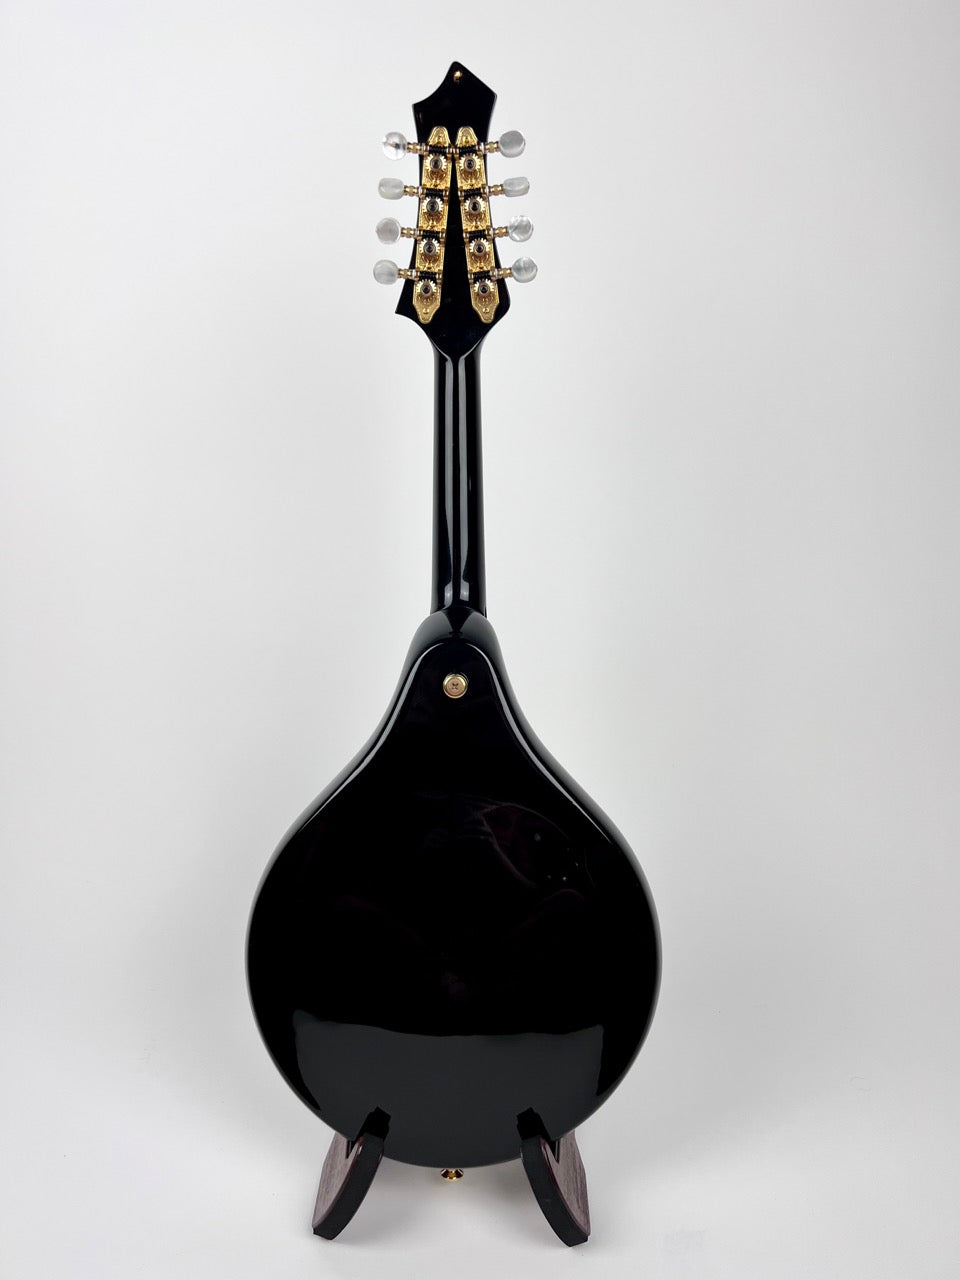 2003 Rigel A Plus Deluxe A Style Mandolin